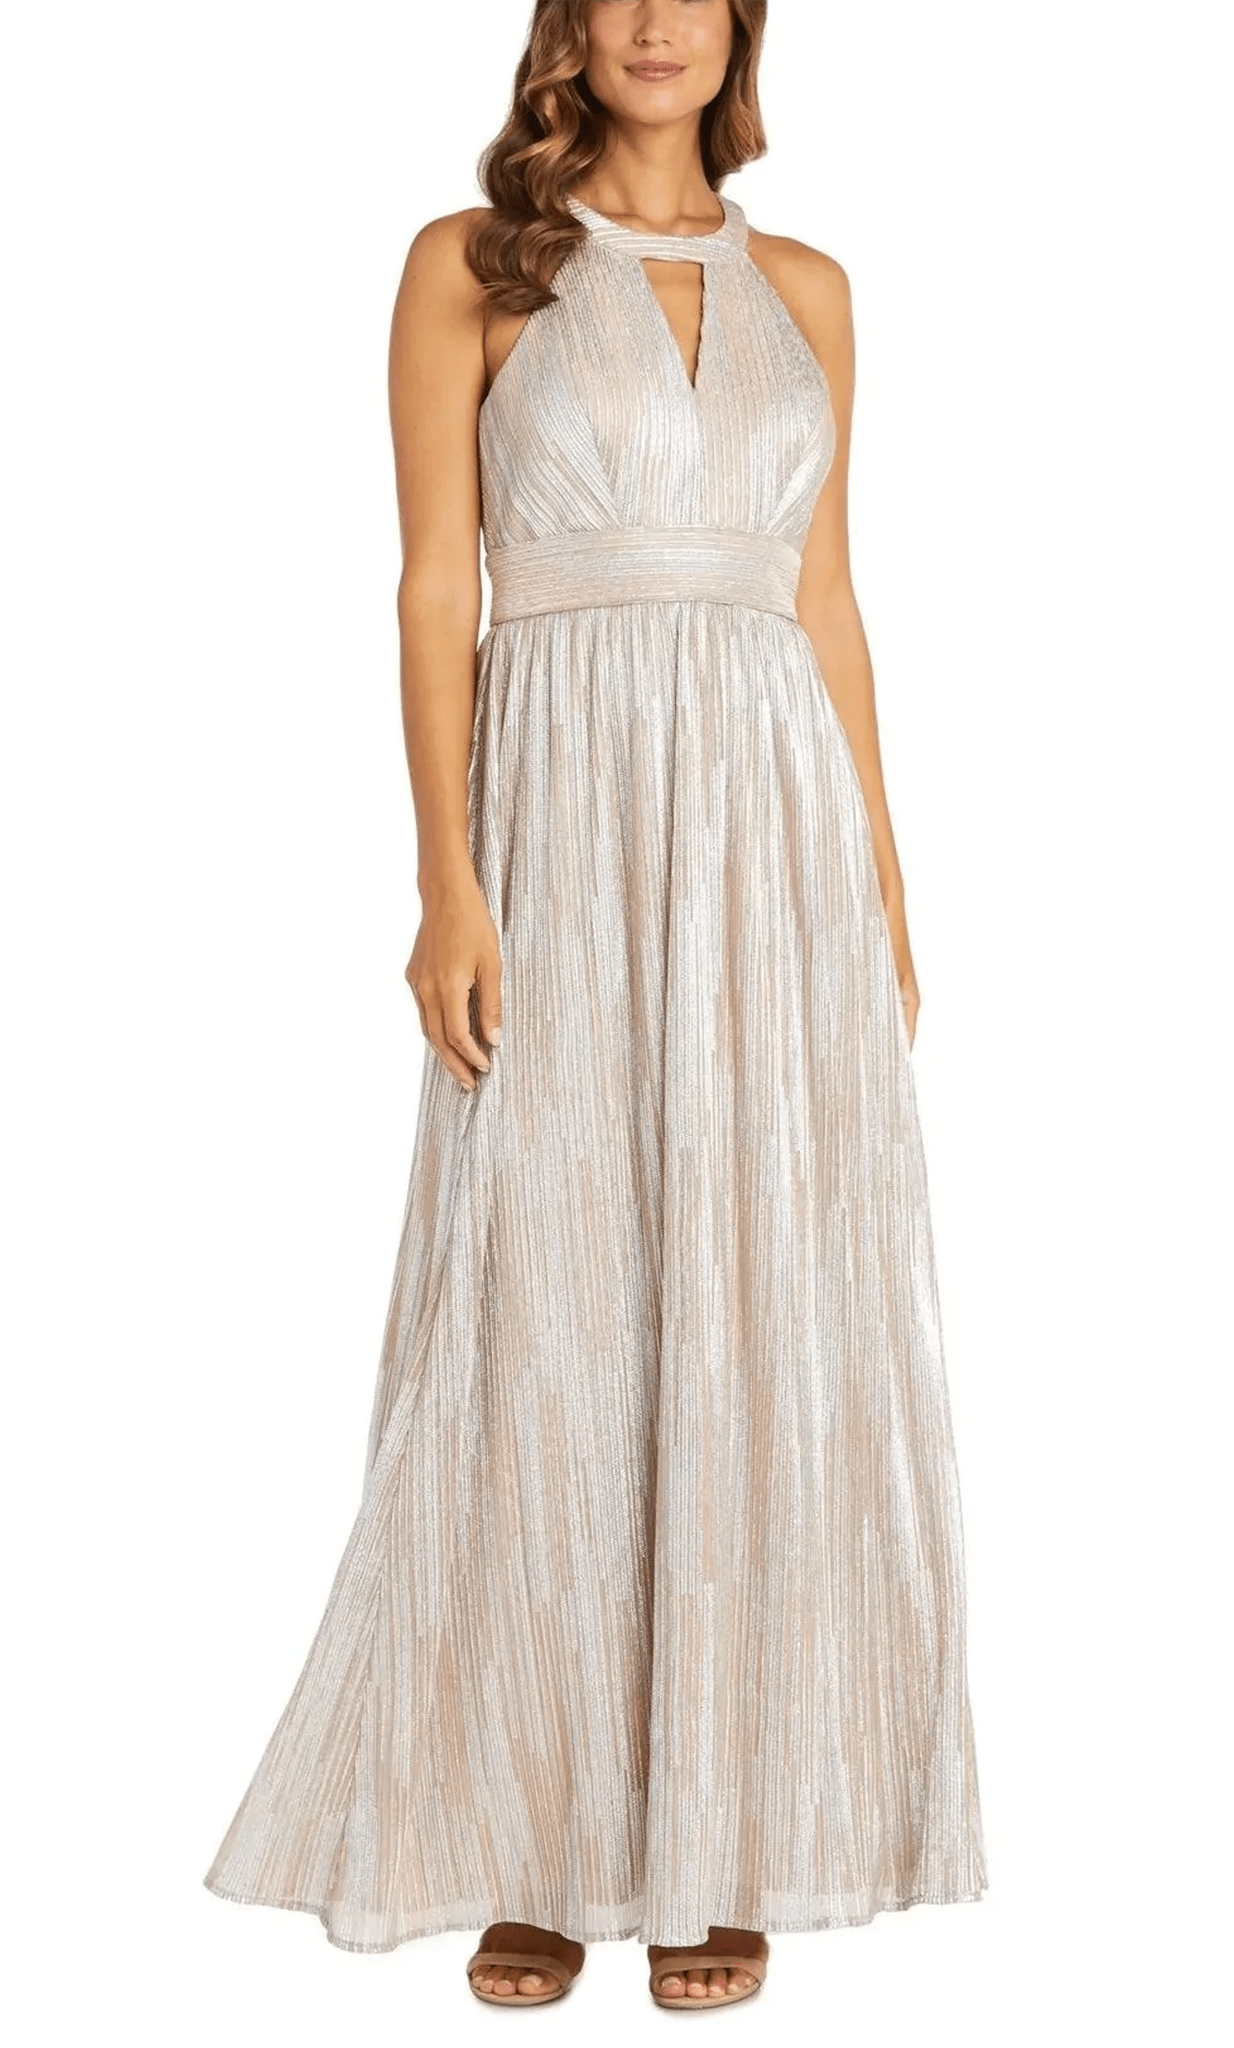 Nightway 22030 - Halter Metallic A-Lin Evening Gown Special Occasion Dress 0 / Champagne Silver